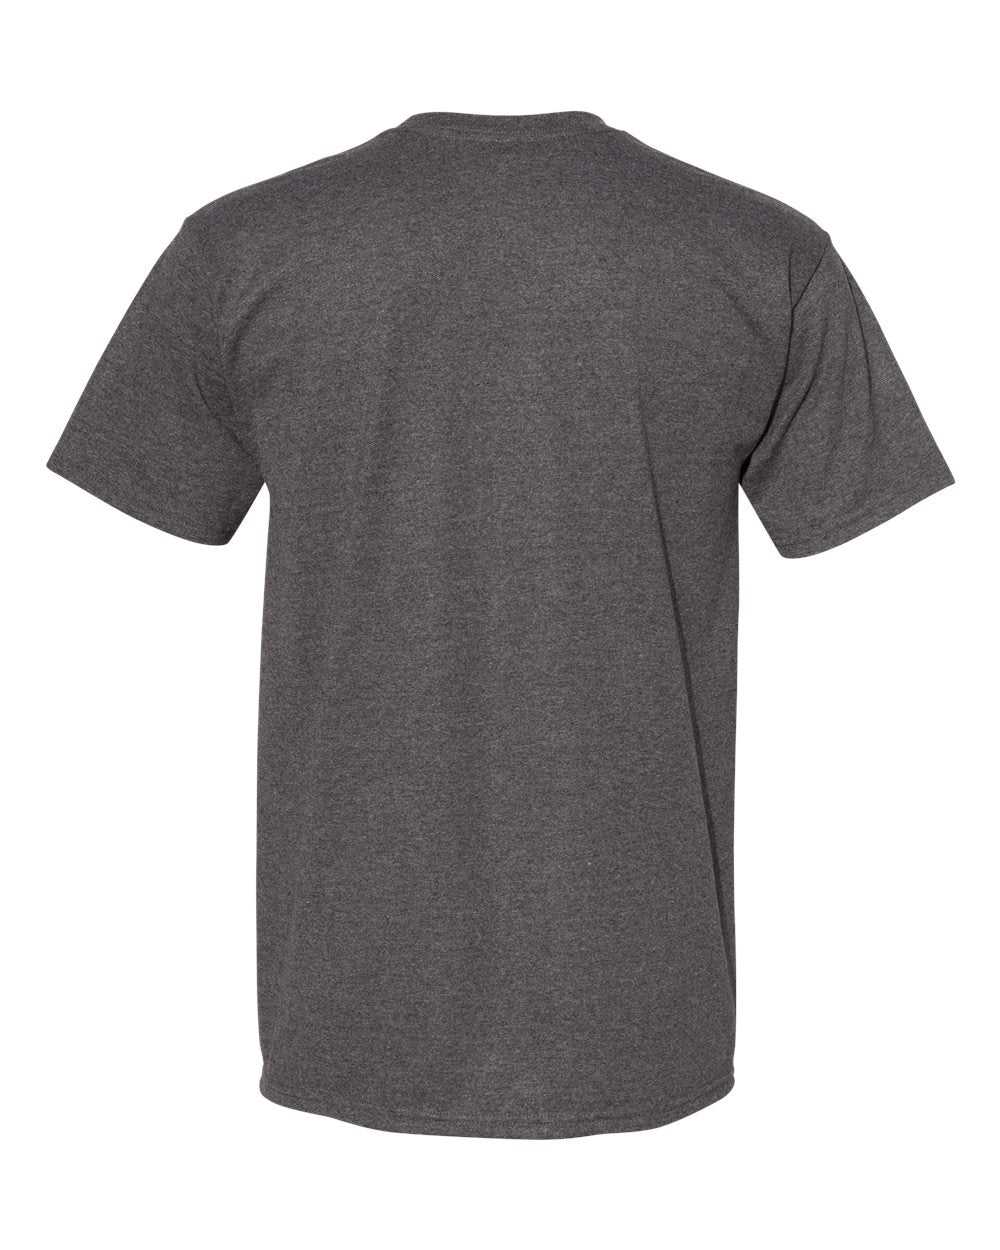 American Apparel 1701 Midweight Cotton Unisex T-Shirt - Charcoal Heather - HIT a Double